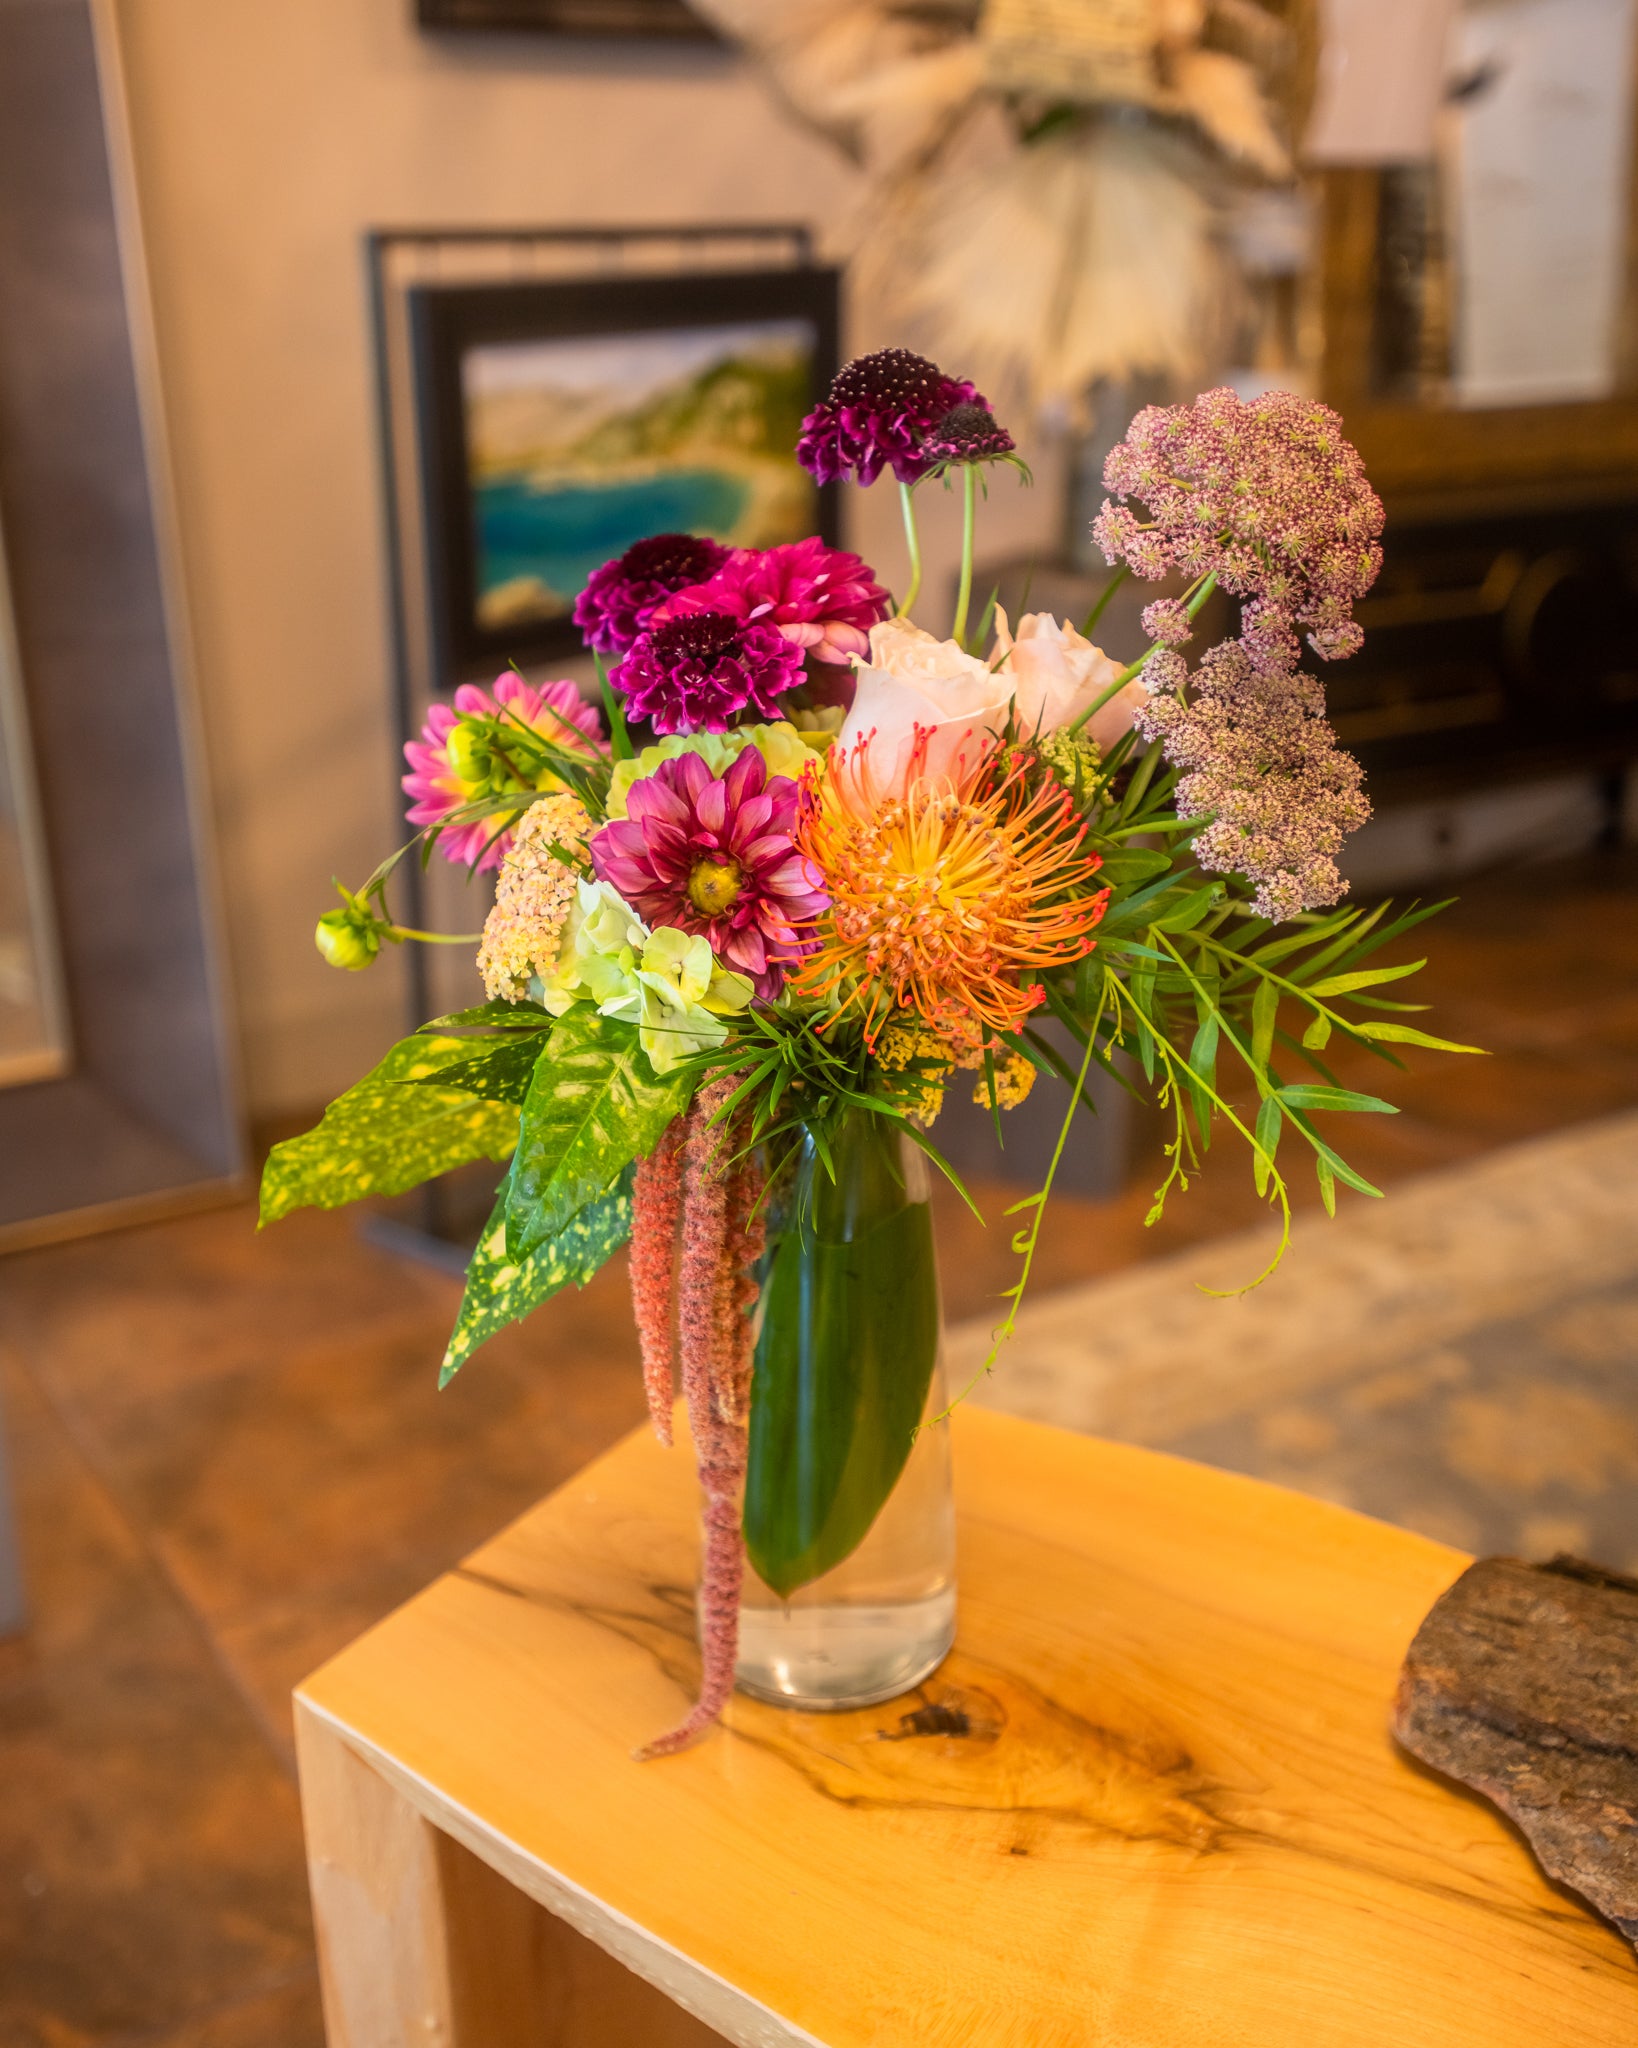 A Compact yet brimful floral mix, slender glass vase